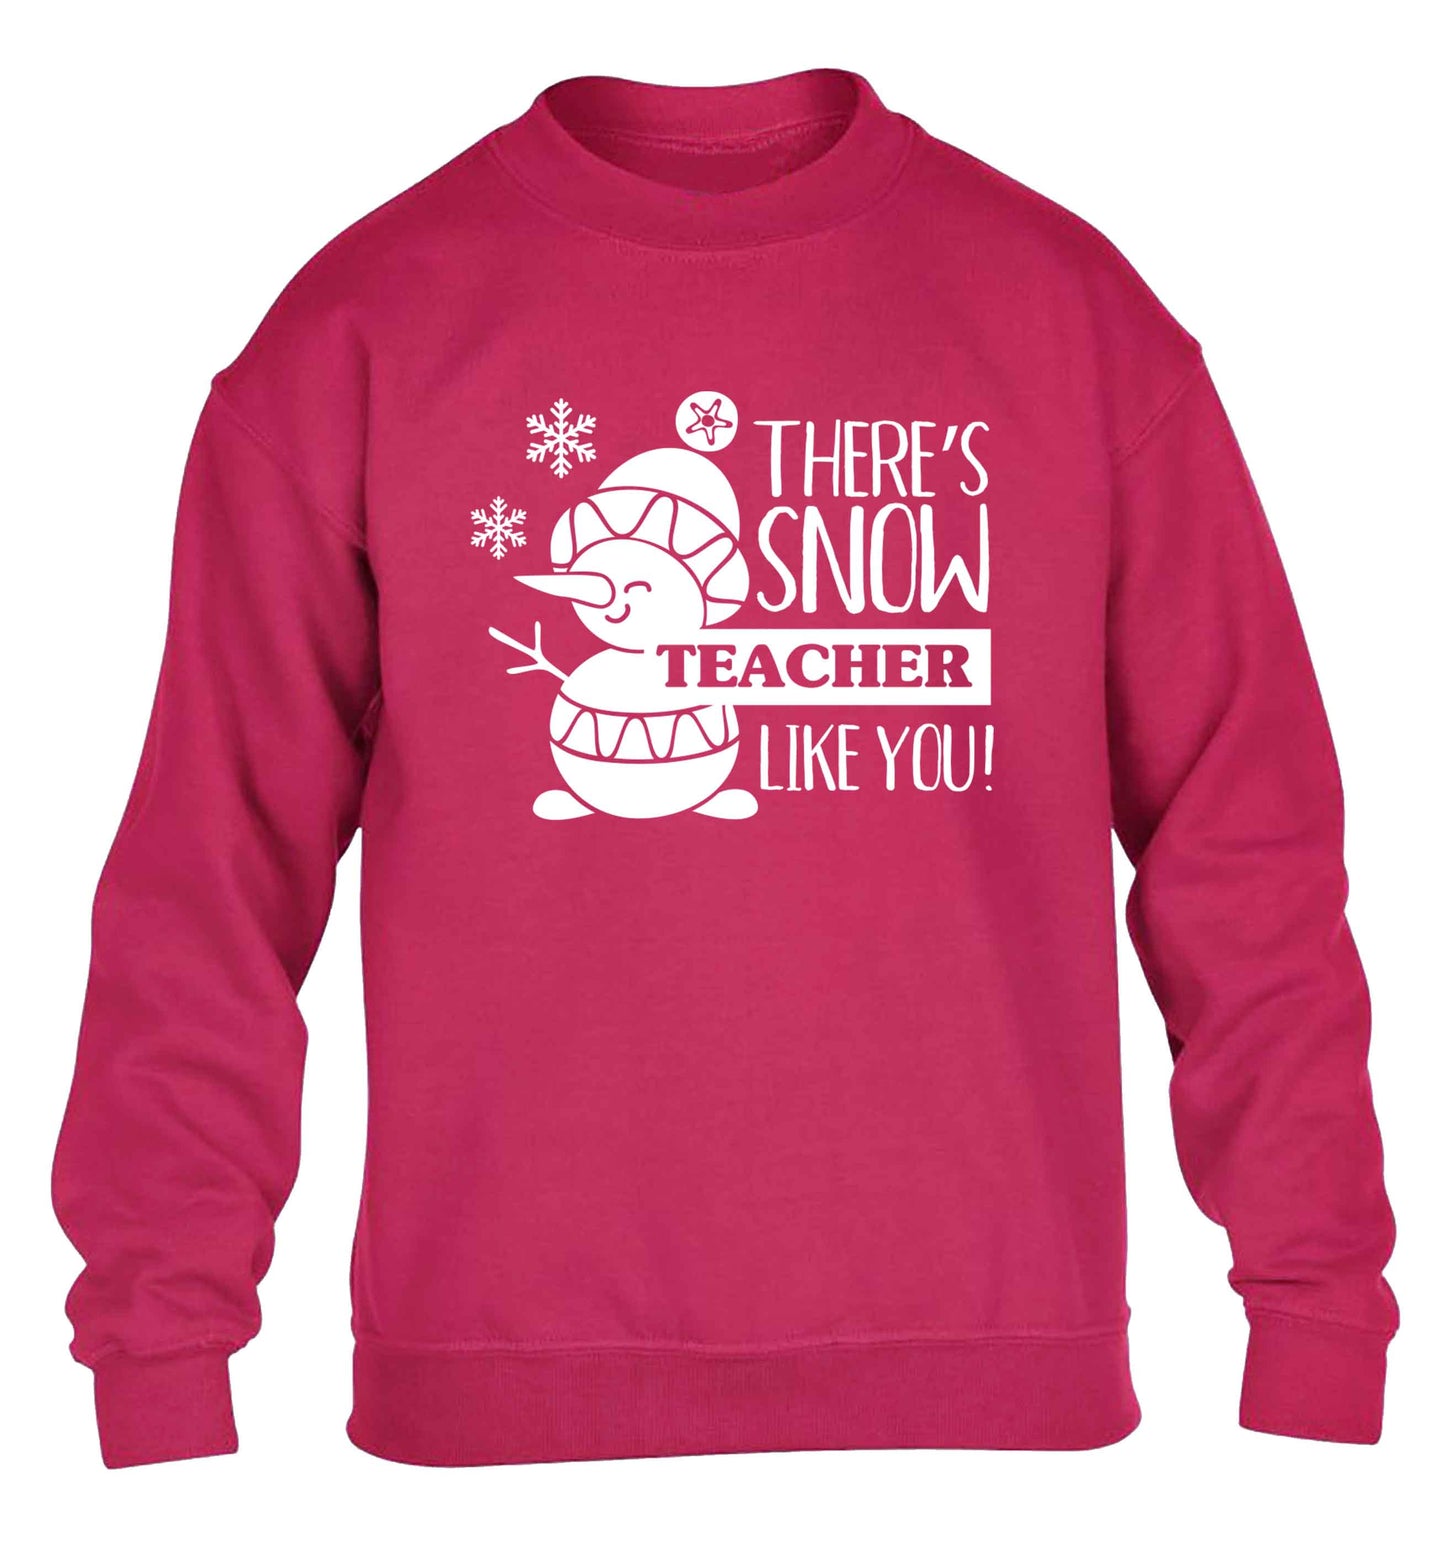 There's snow teacher like you children's pink sweater 12-13 Years